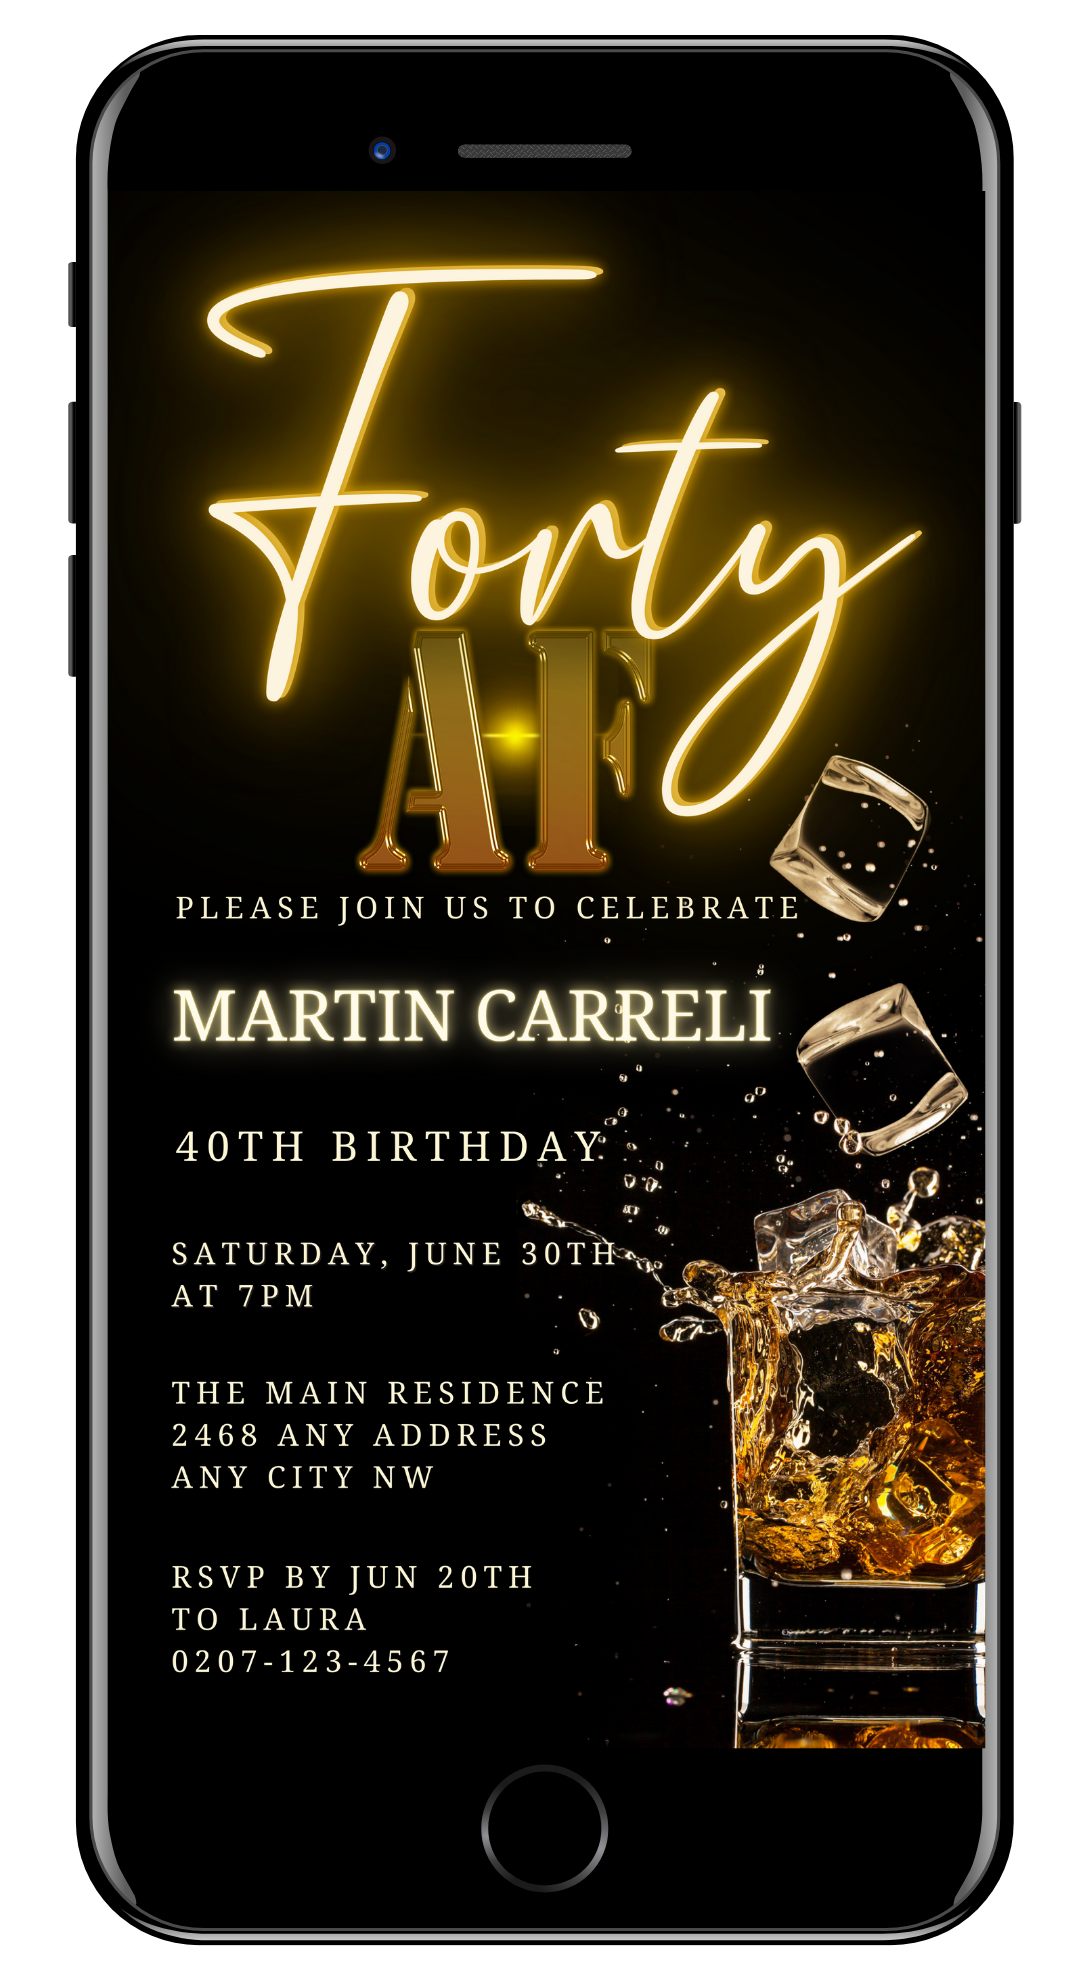 Customizable Digital Black Gold Neon Cube Splash | 40AF Birthday Evite displayed on a smartphone screen, showing editable text and graphics for a personalized digital invitation.